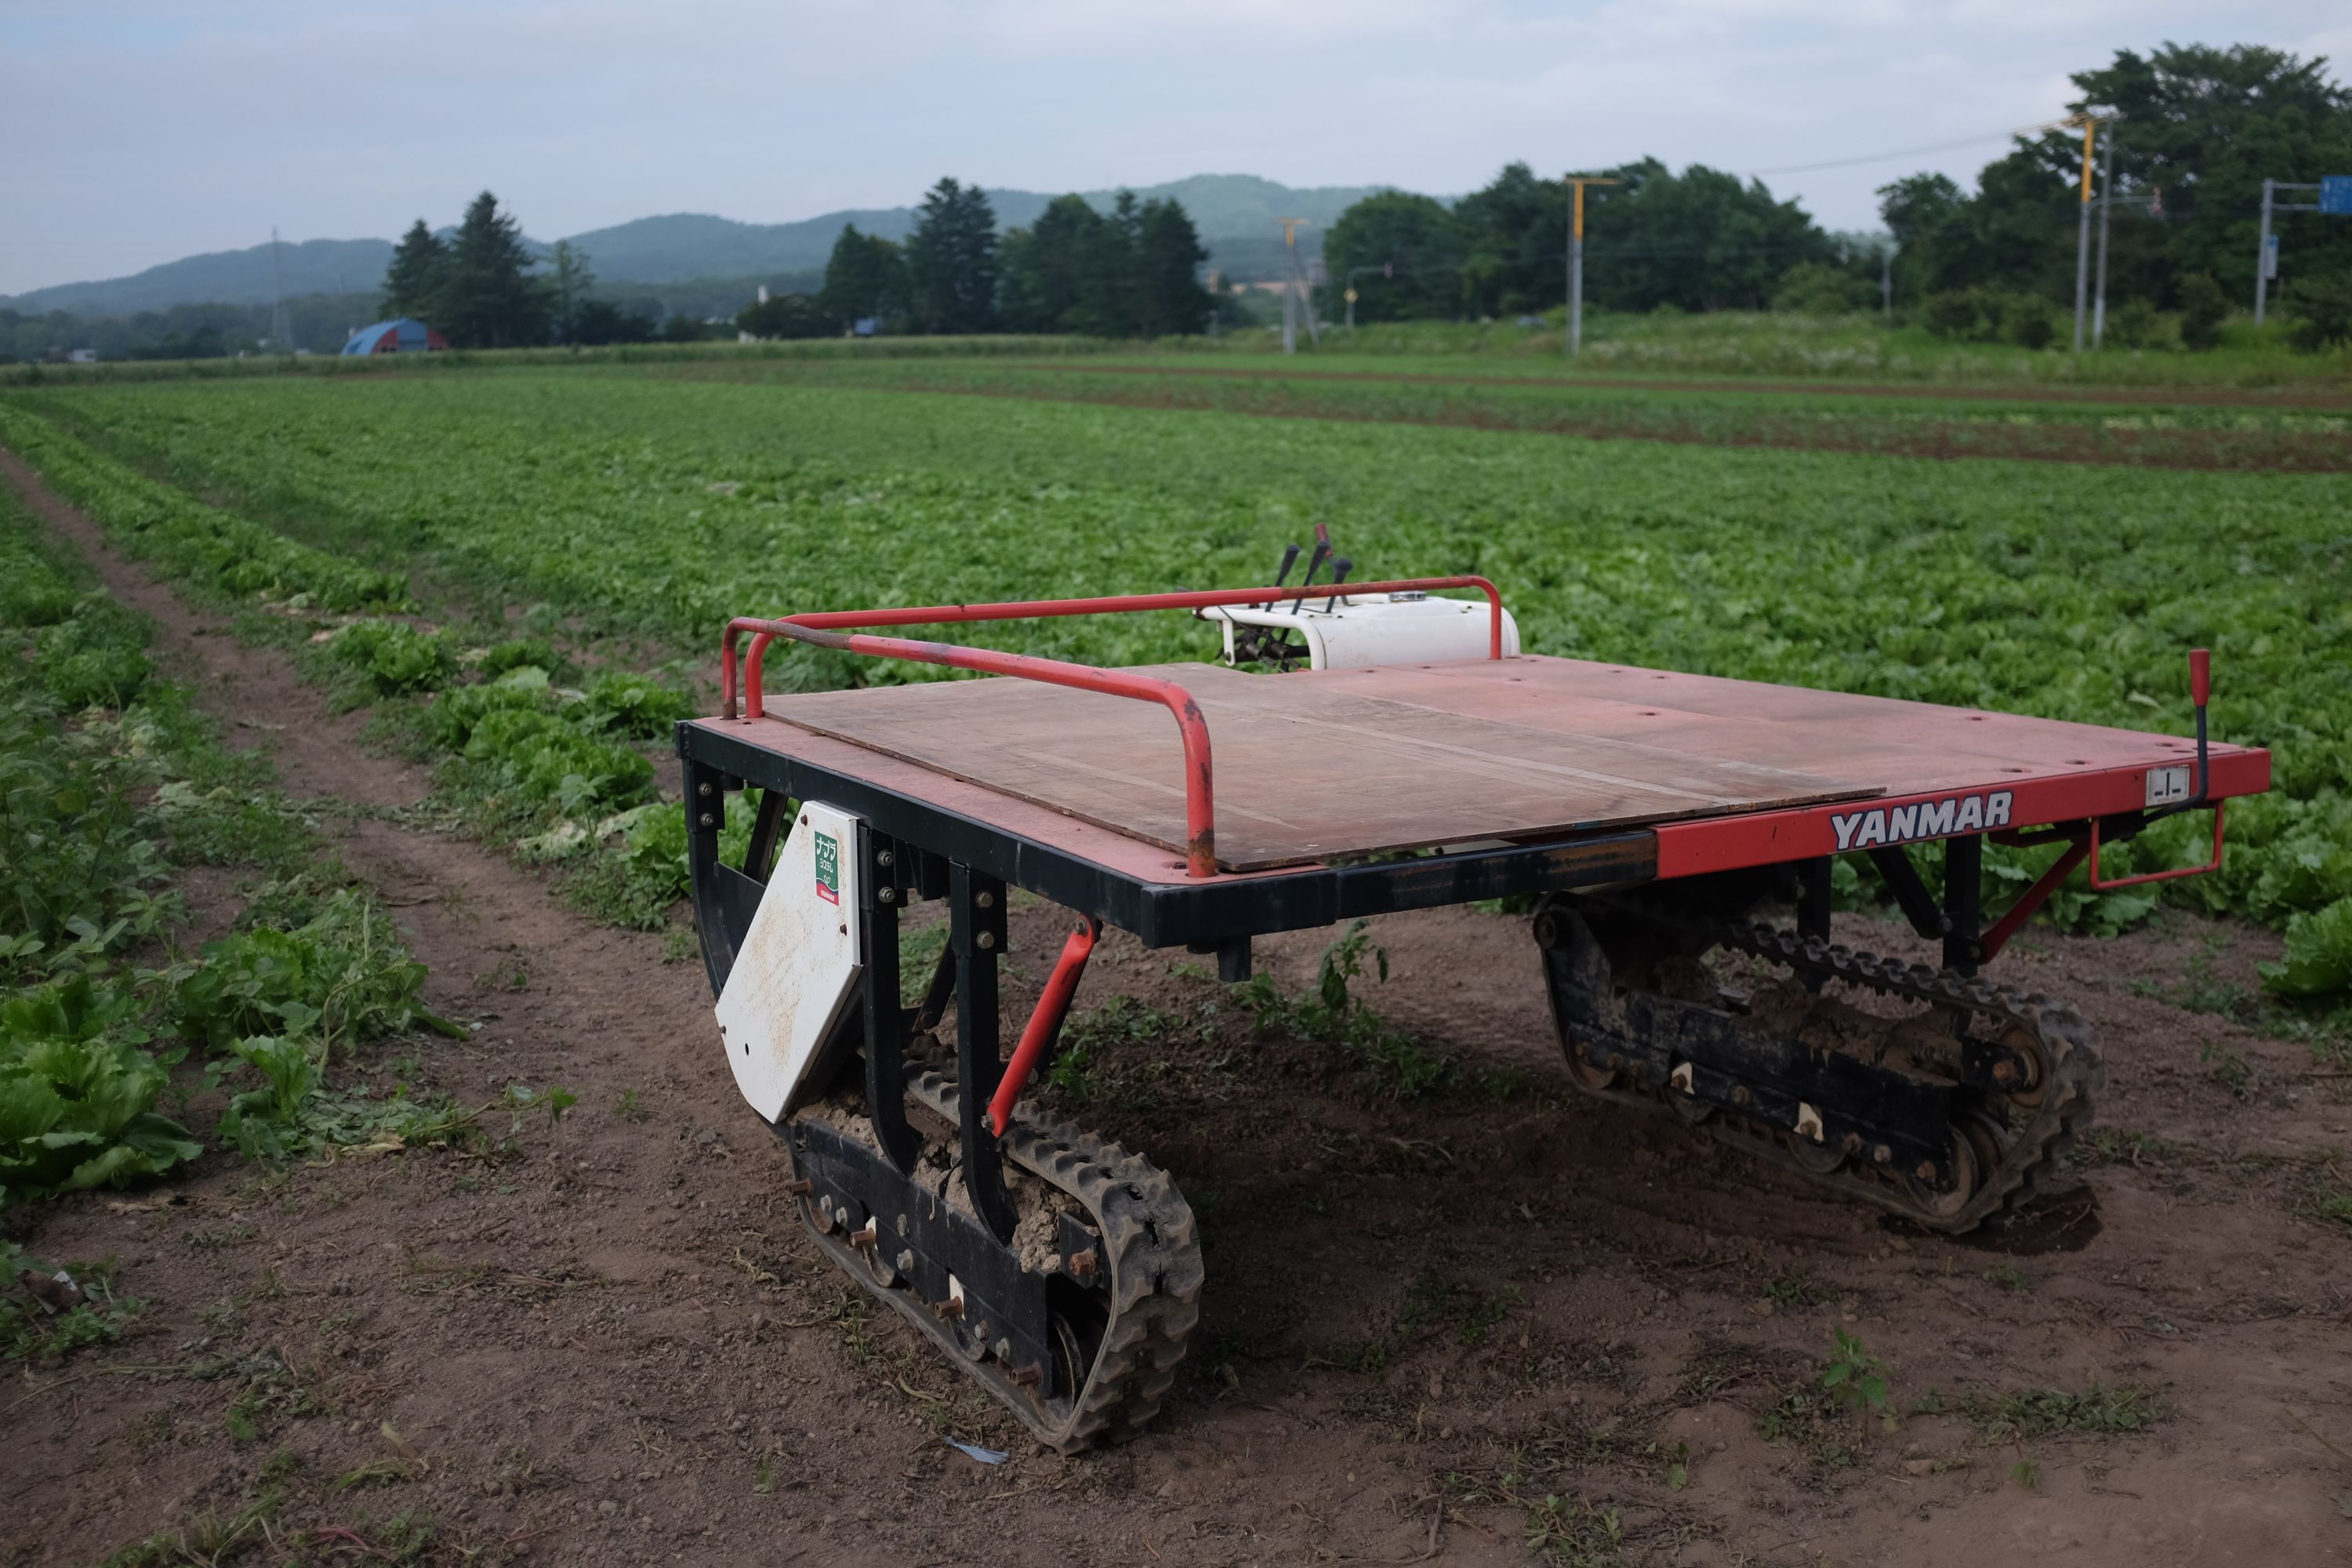 A small, tracked planter parked by a green field.